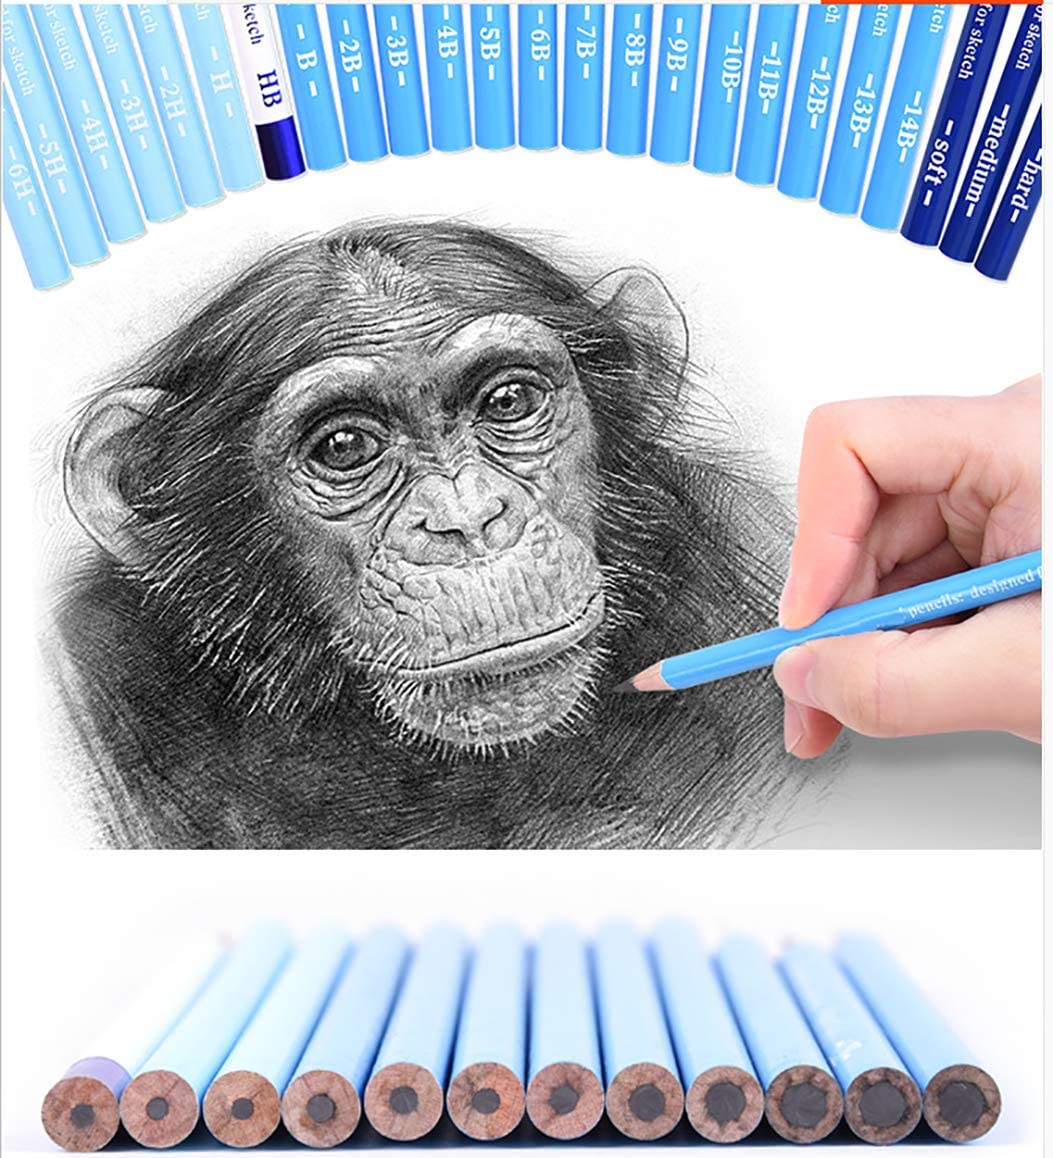 BRUTFUNER 24 Pieces Professional HB Sketching Pencil Set for Drawing Drafting